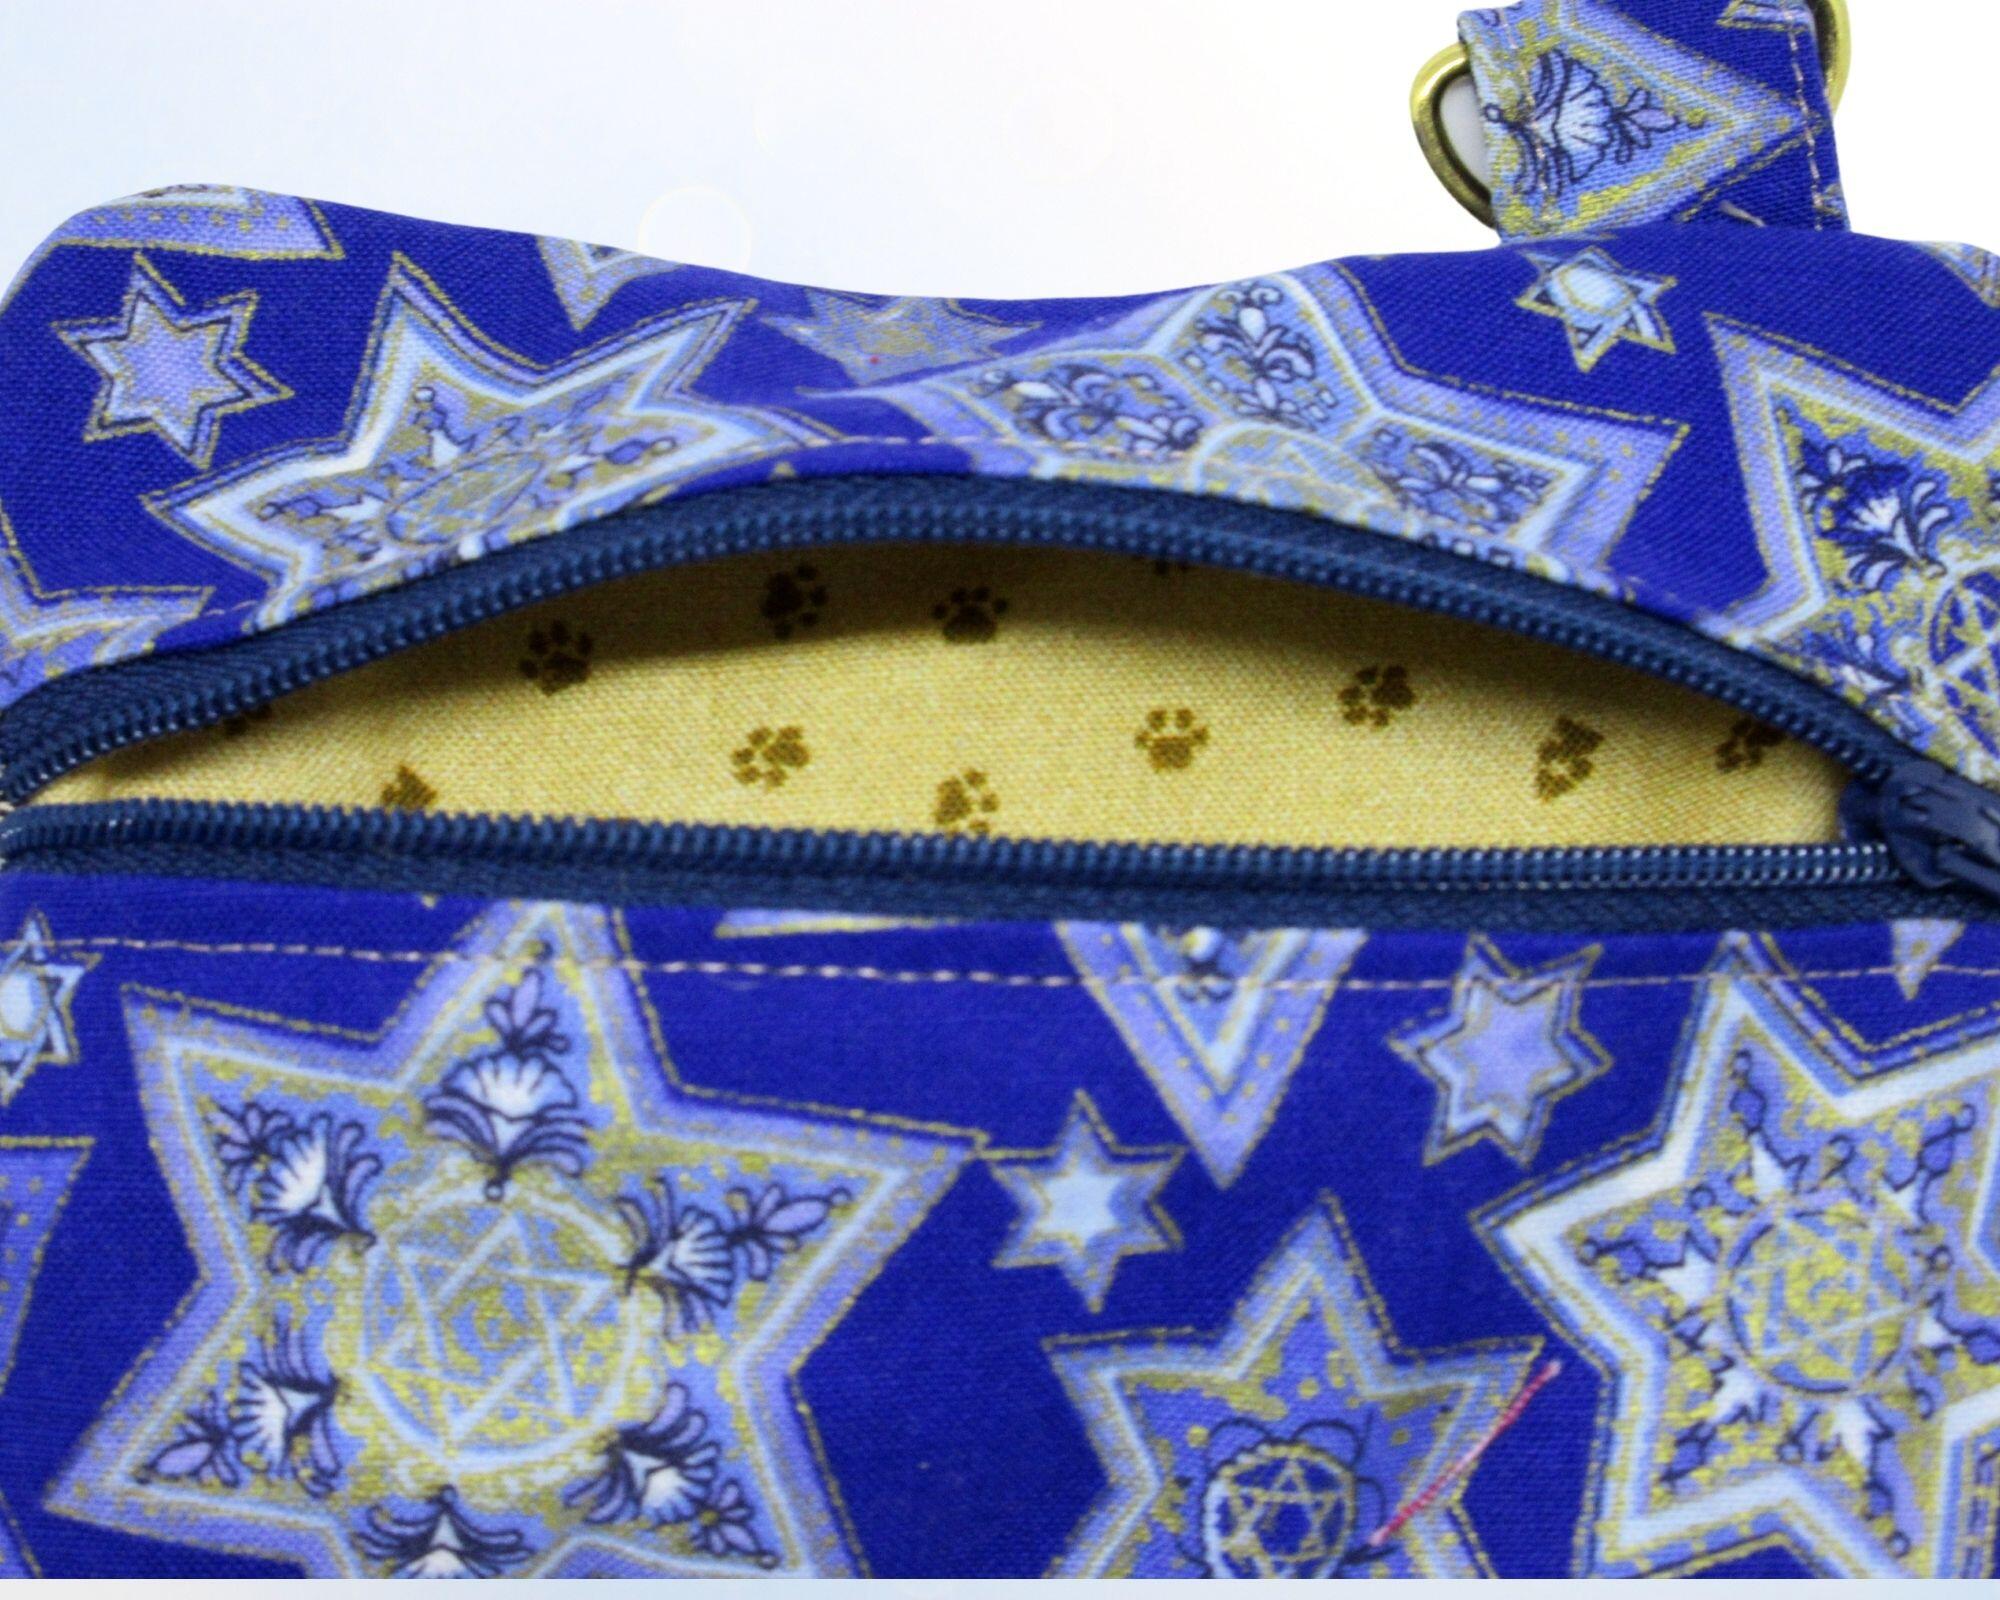 close up Jewish star 6 points blue and gold with gold tone hardware Multi purpose pouch Handmade by a Fur Baby Favorite dog poop bag holder waste bag dispenser training treat pouch binky pacifier bag change purse pouch